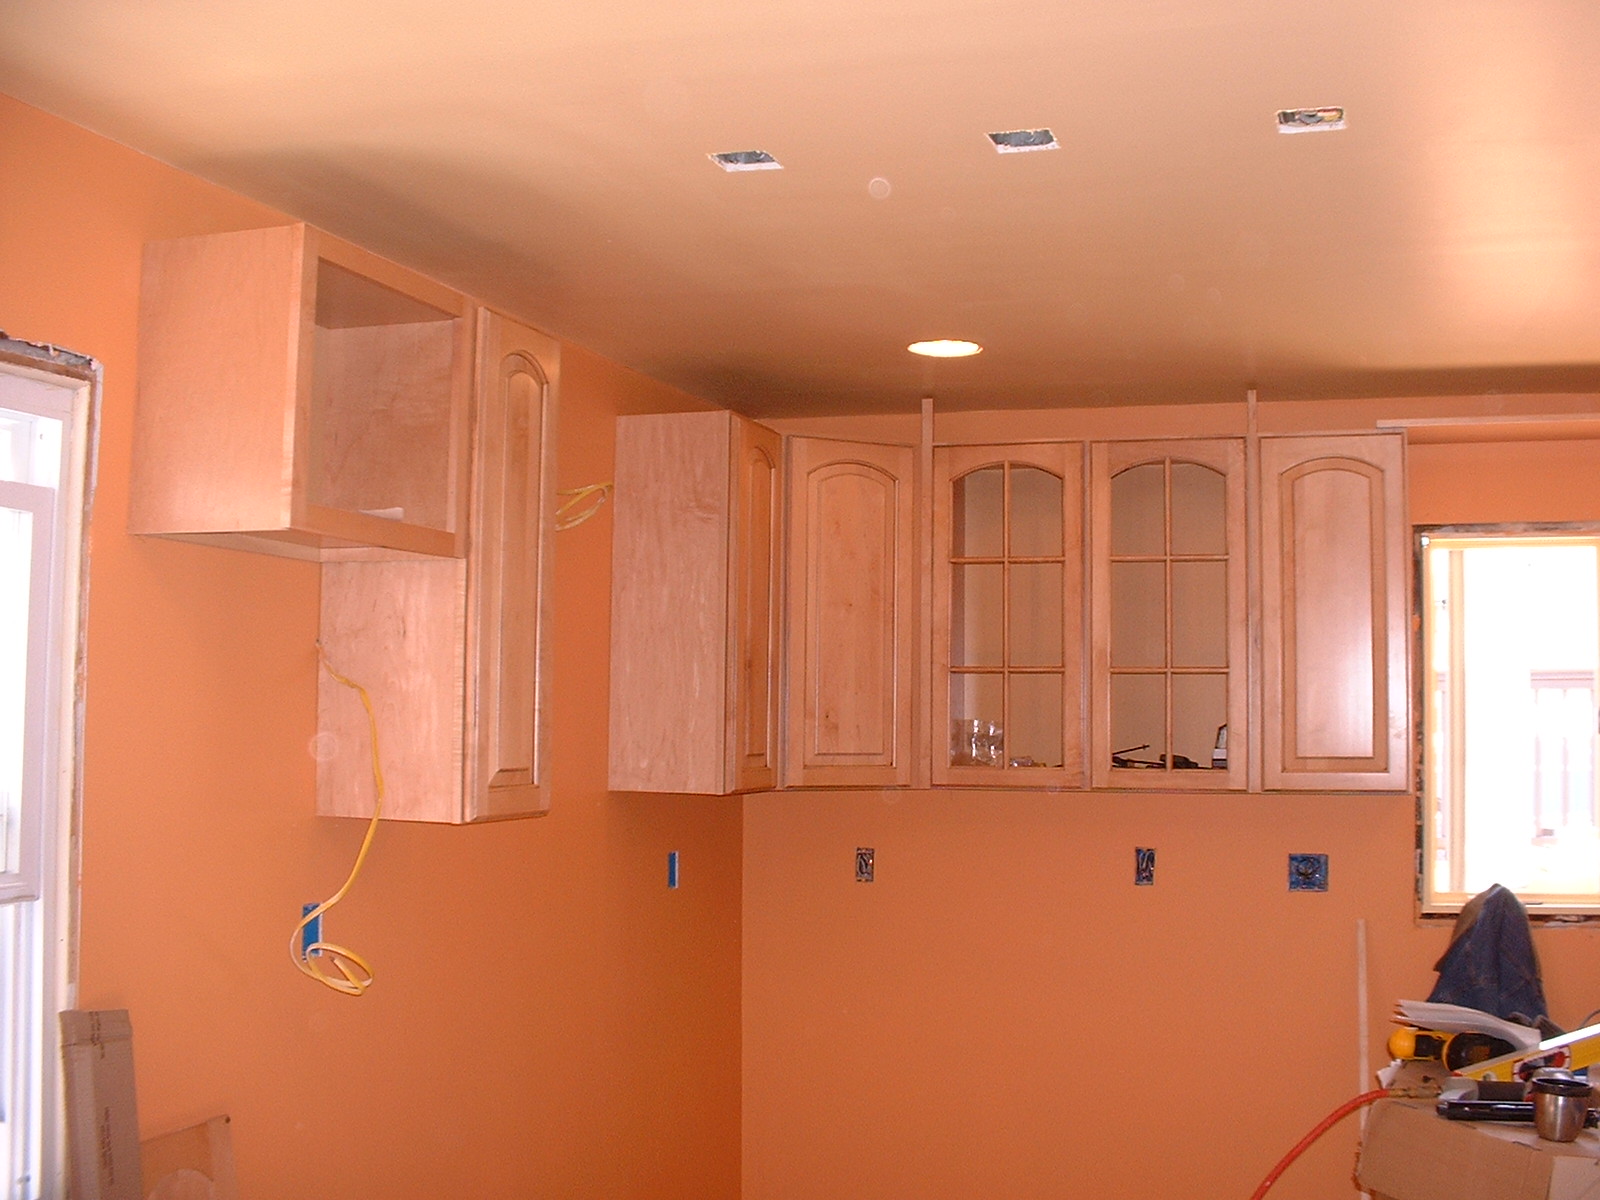 The upper cabinets are almost finished.